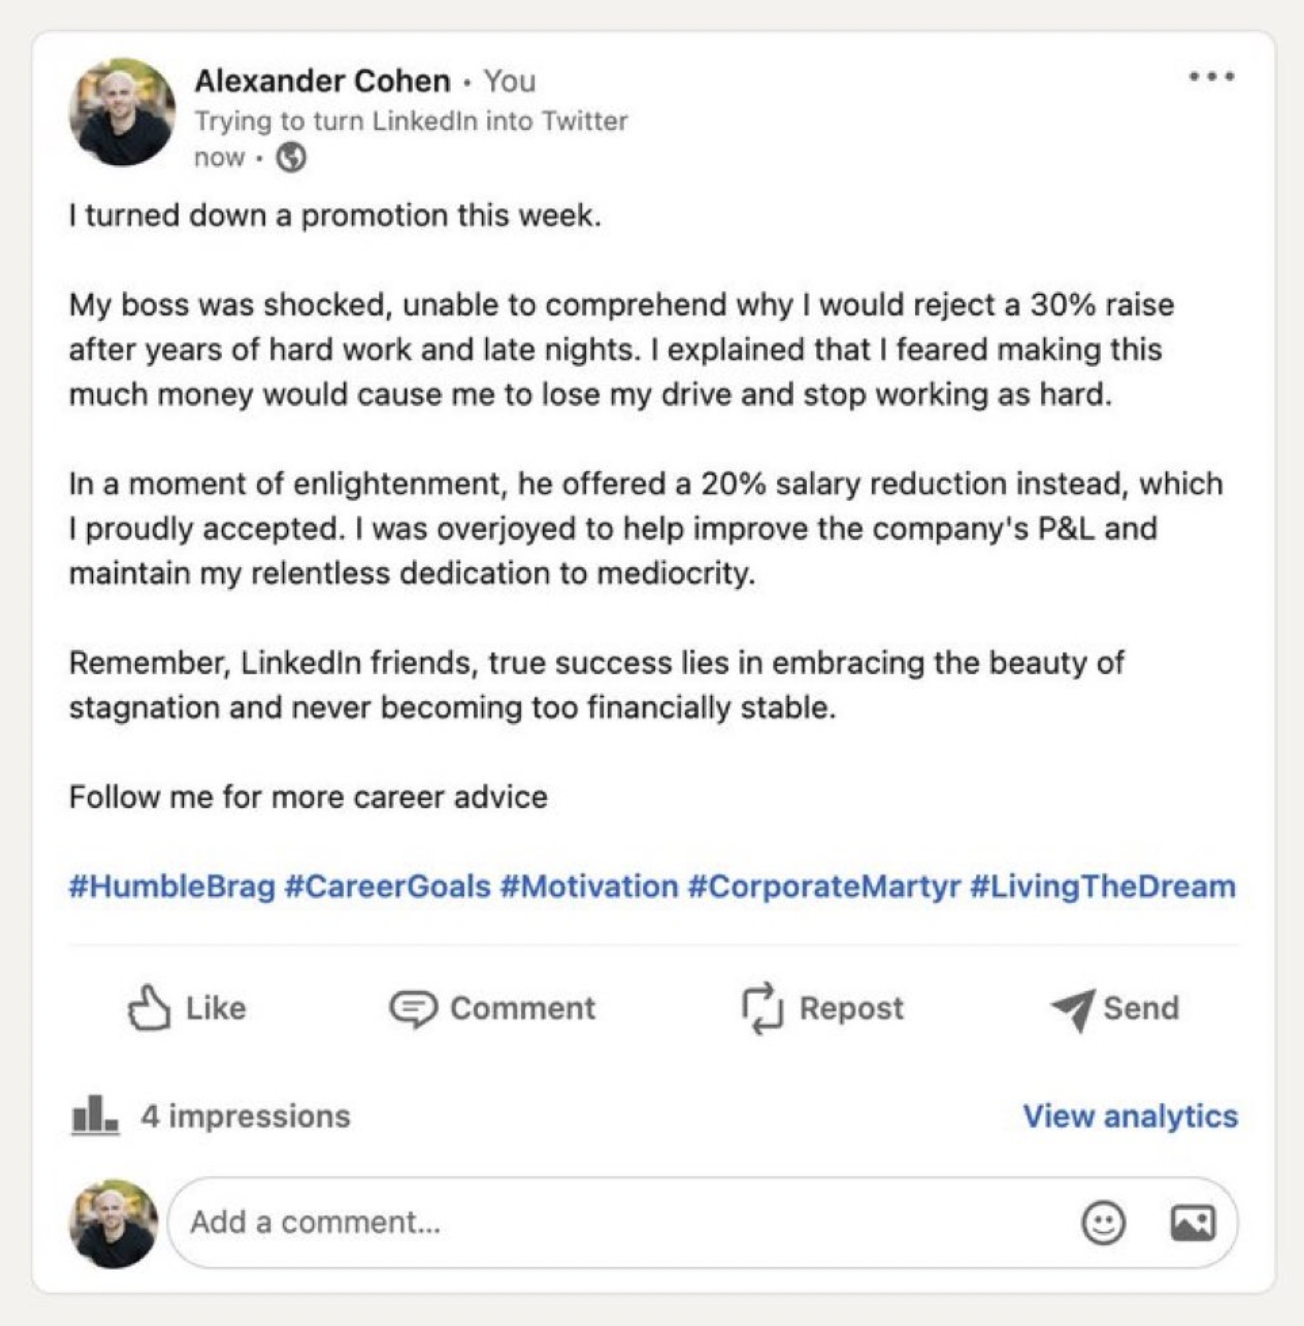 web page - Alexander Cohen You Trying to turn LinkedIn into Twitter now. I turned down a promotion this week. My boss was shocked, unable to comprehend why I would reject a 30% raise after years of hard work and late nights. I explained that I feared maki